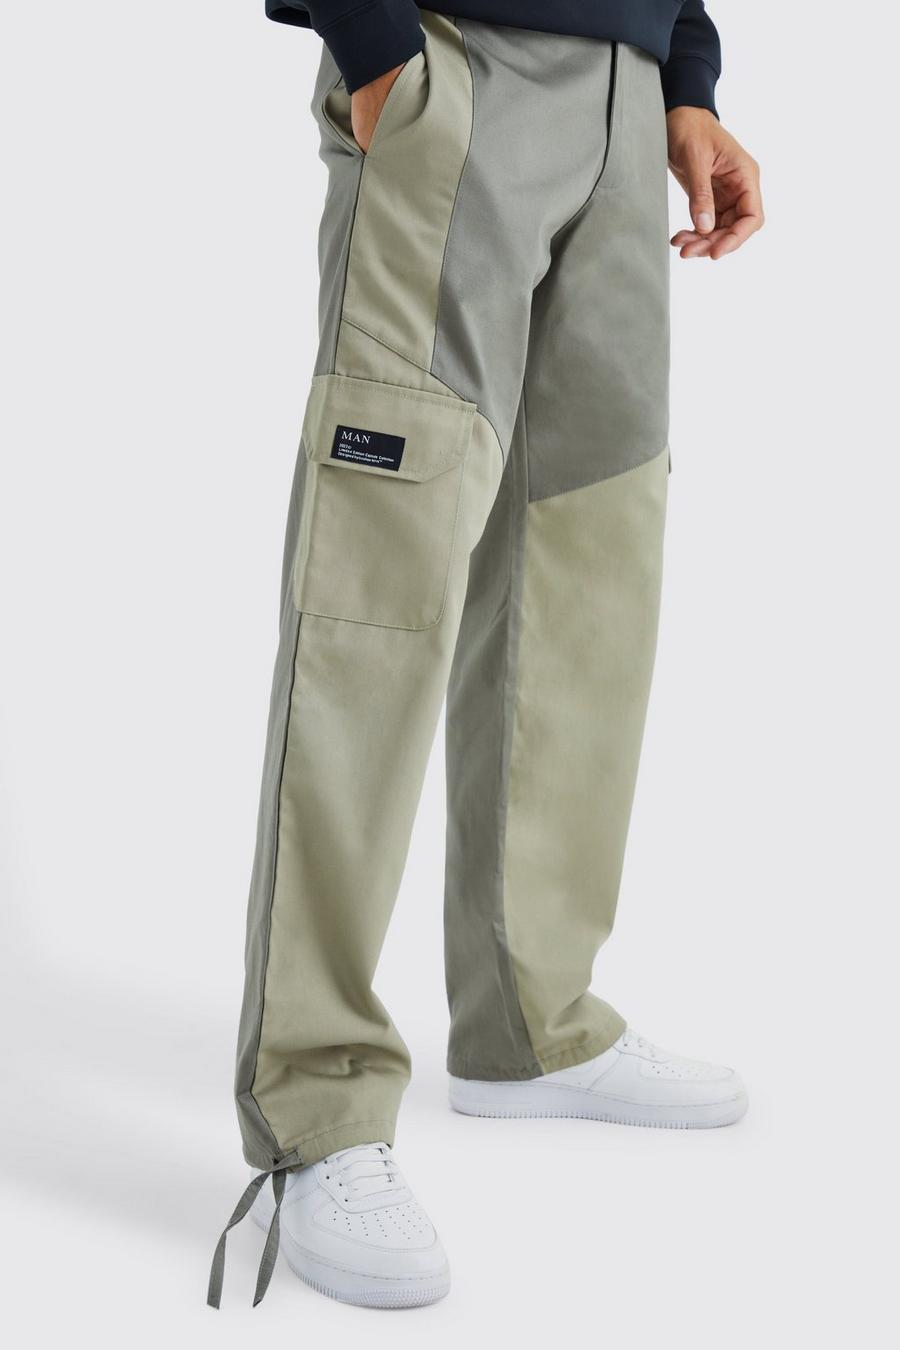 Tall Slim Fit Colour Block Cargo Trouser With Woven Tab